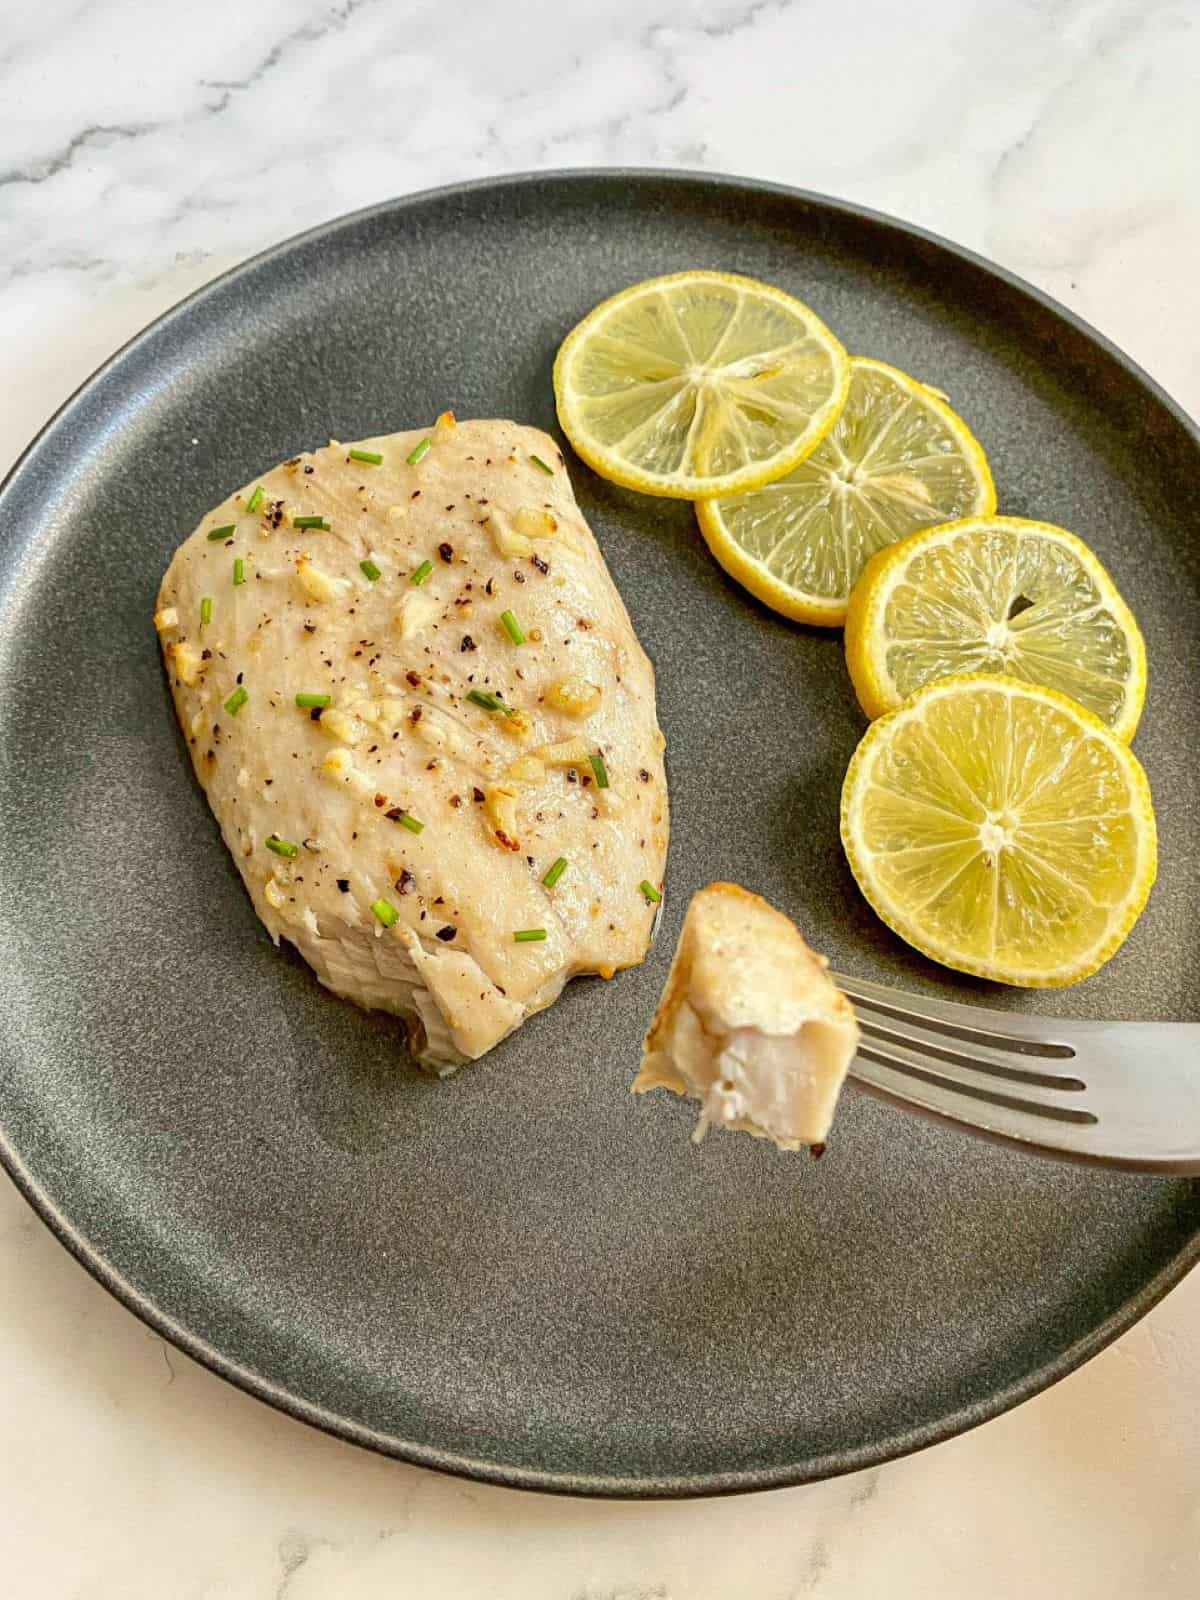 A fish fillet on a plate with lemons on the side. A fork has a piece of fish on it.